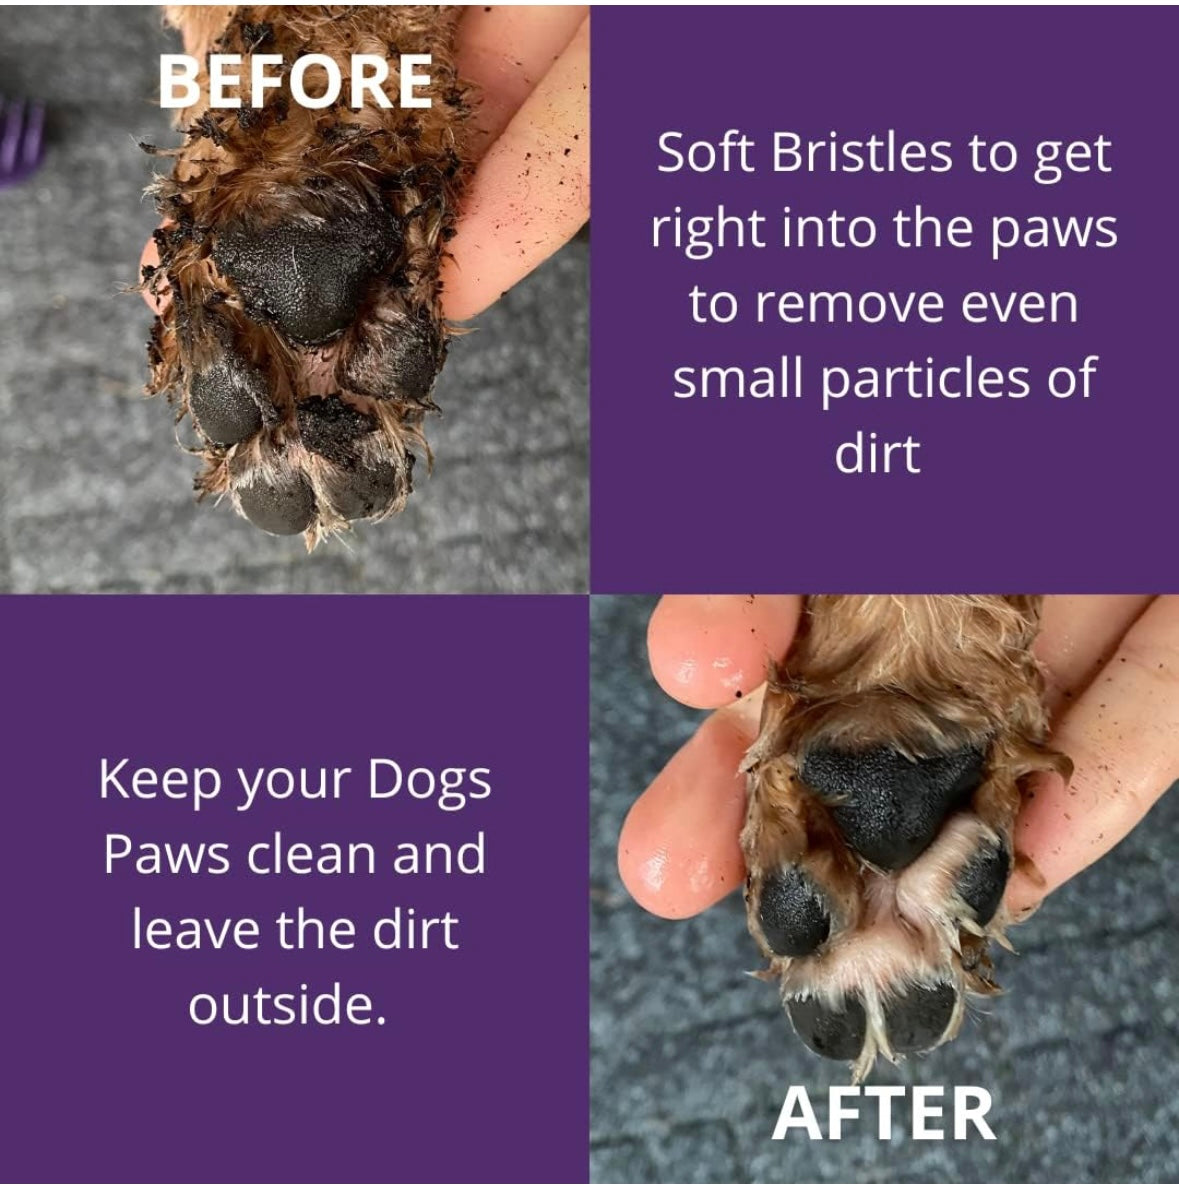 Dog Paw cleaner - The ultimate dog paw cleaner by paw buddy